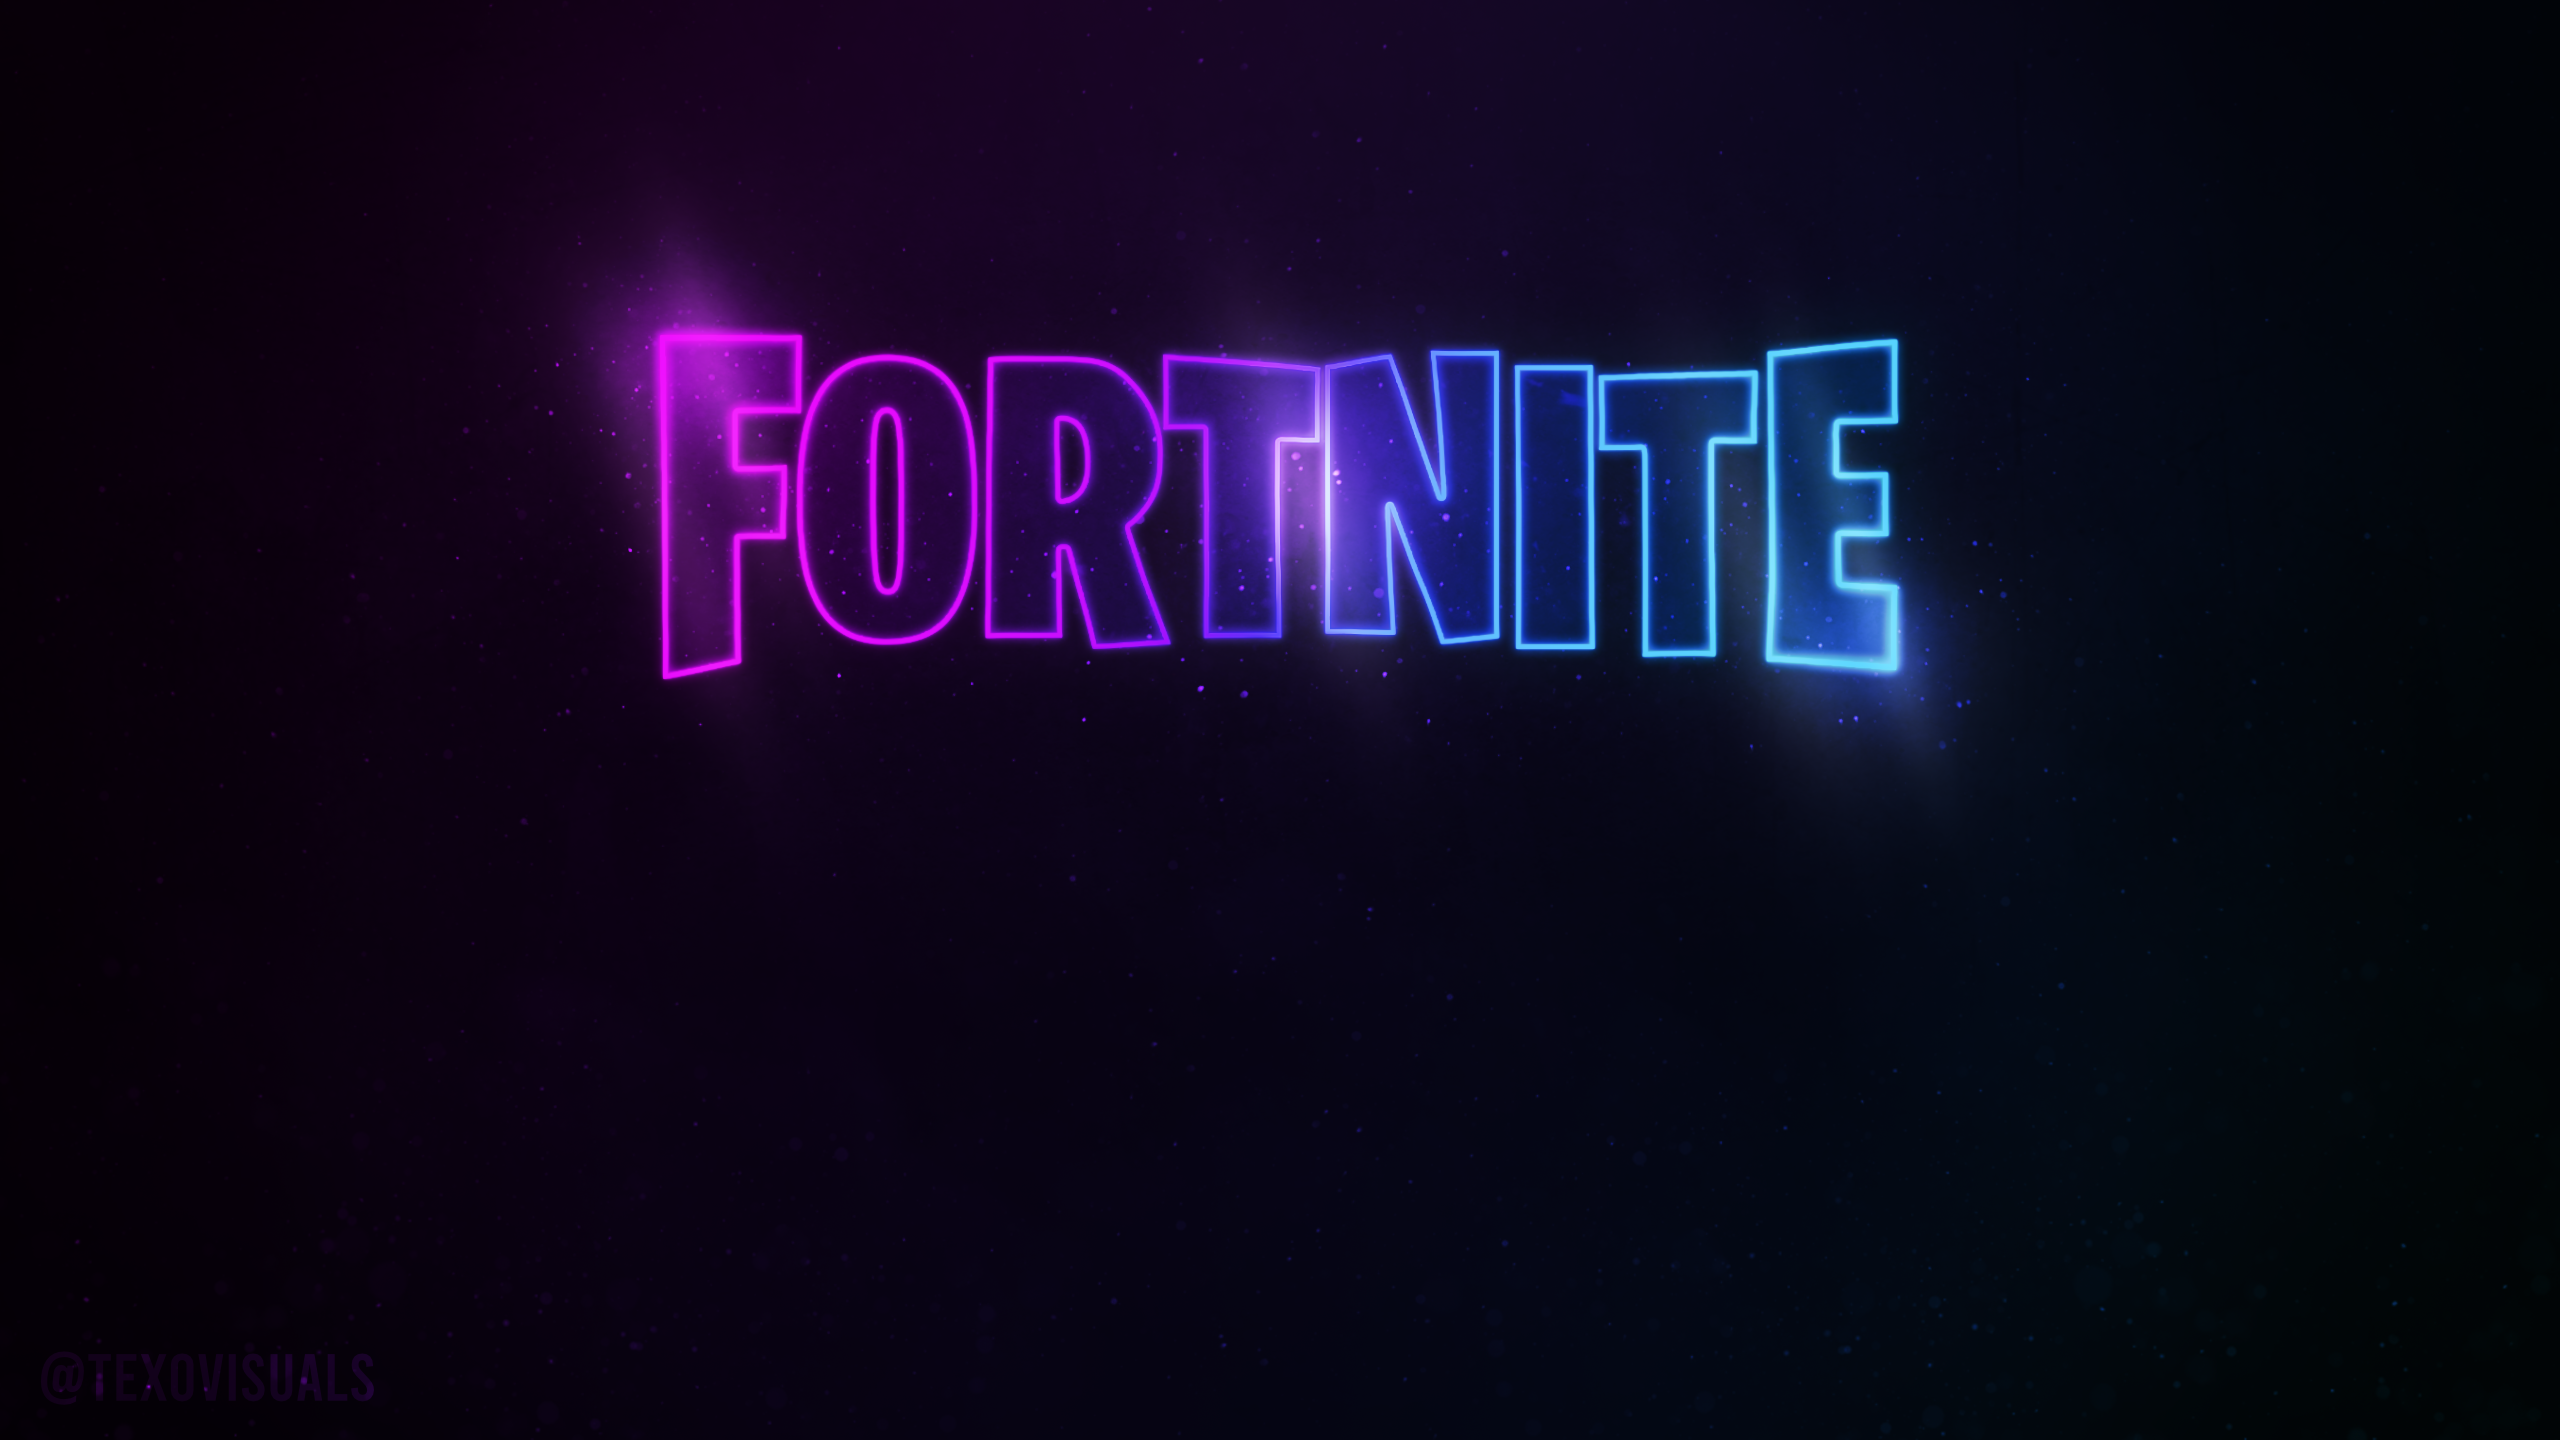 Download wallpapers Fortnite logo purple glitter logo emblem creative  art popular games purple metal texture Fortnite logo for desktop with  resolution 2560x1600 High Quality HD pictures wallpapers